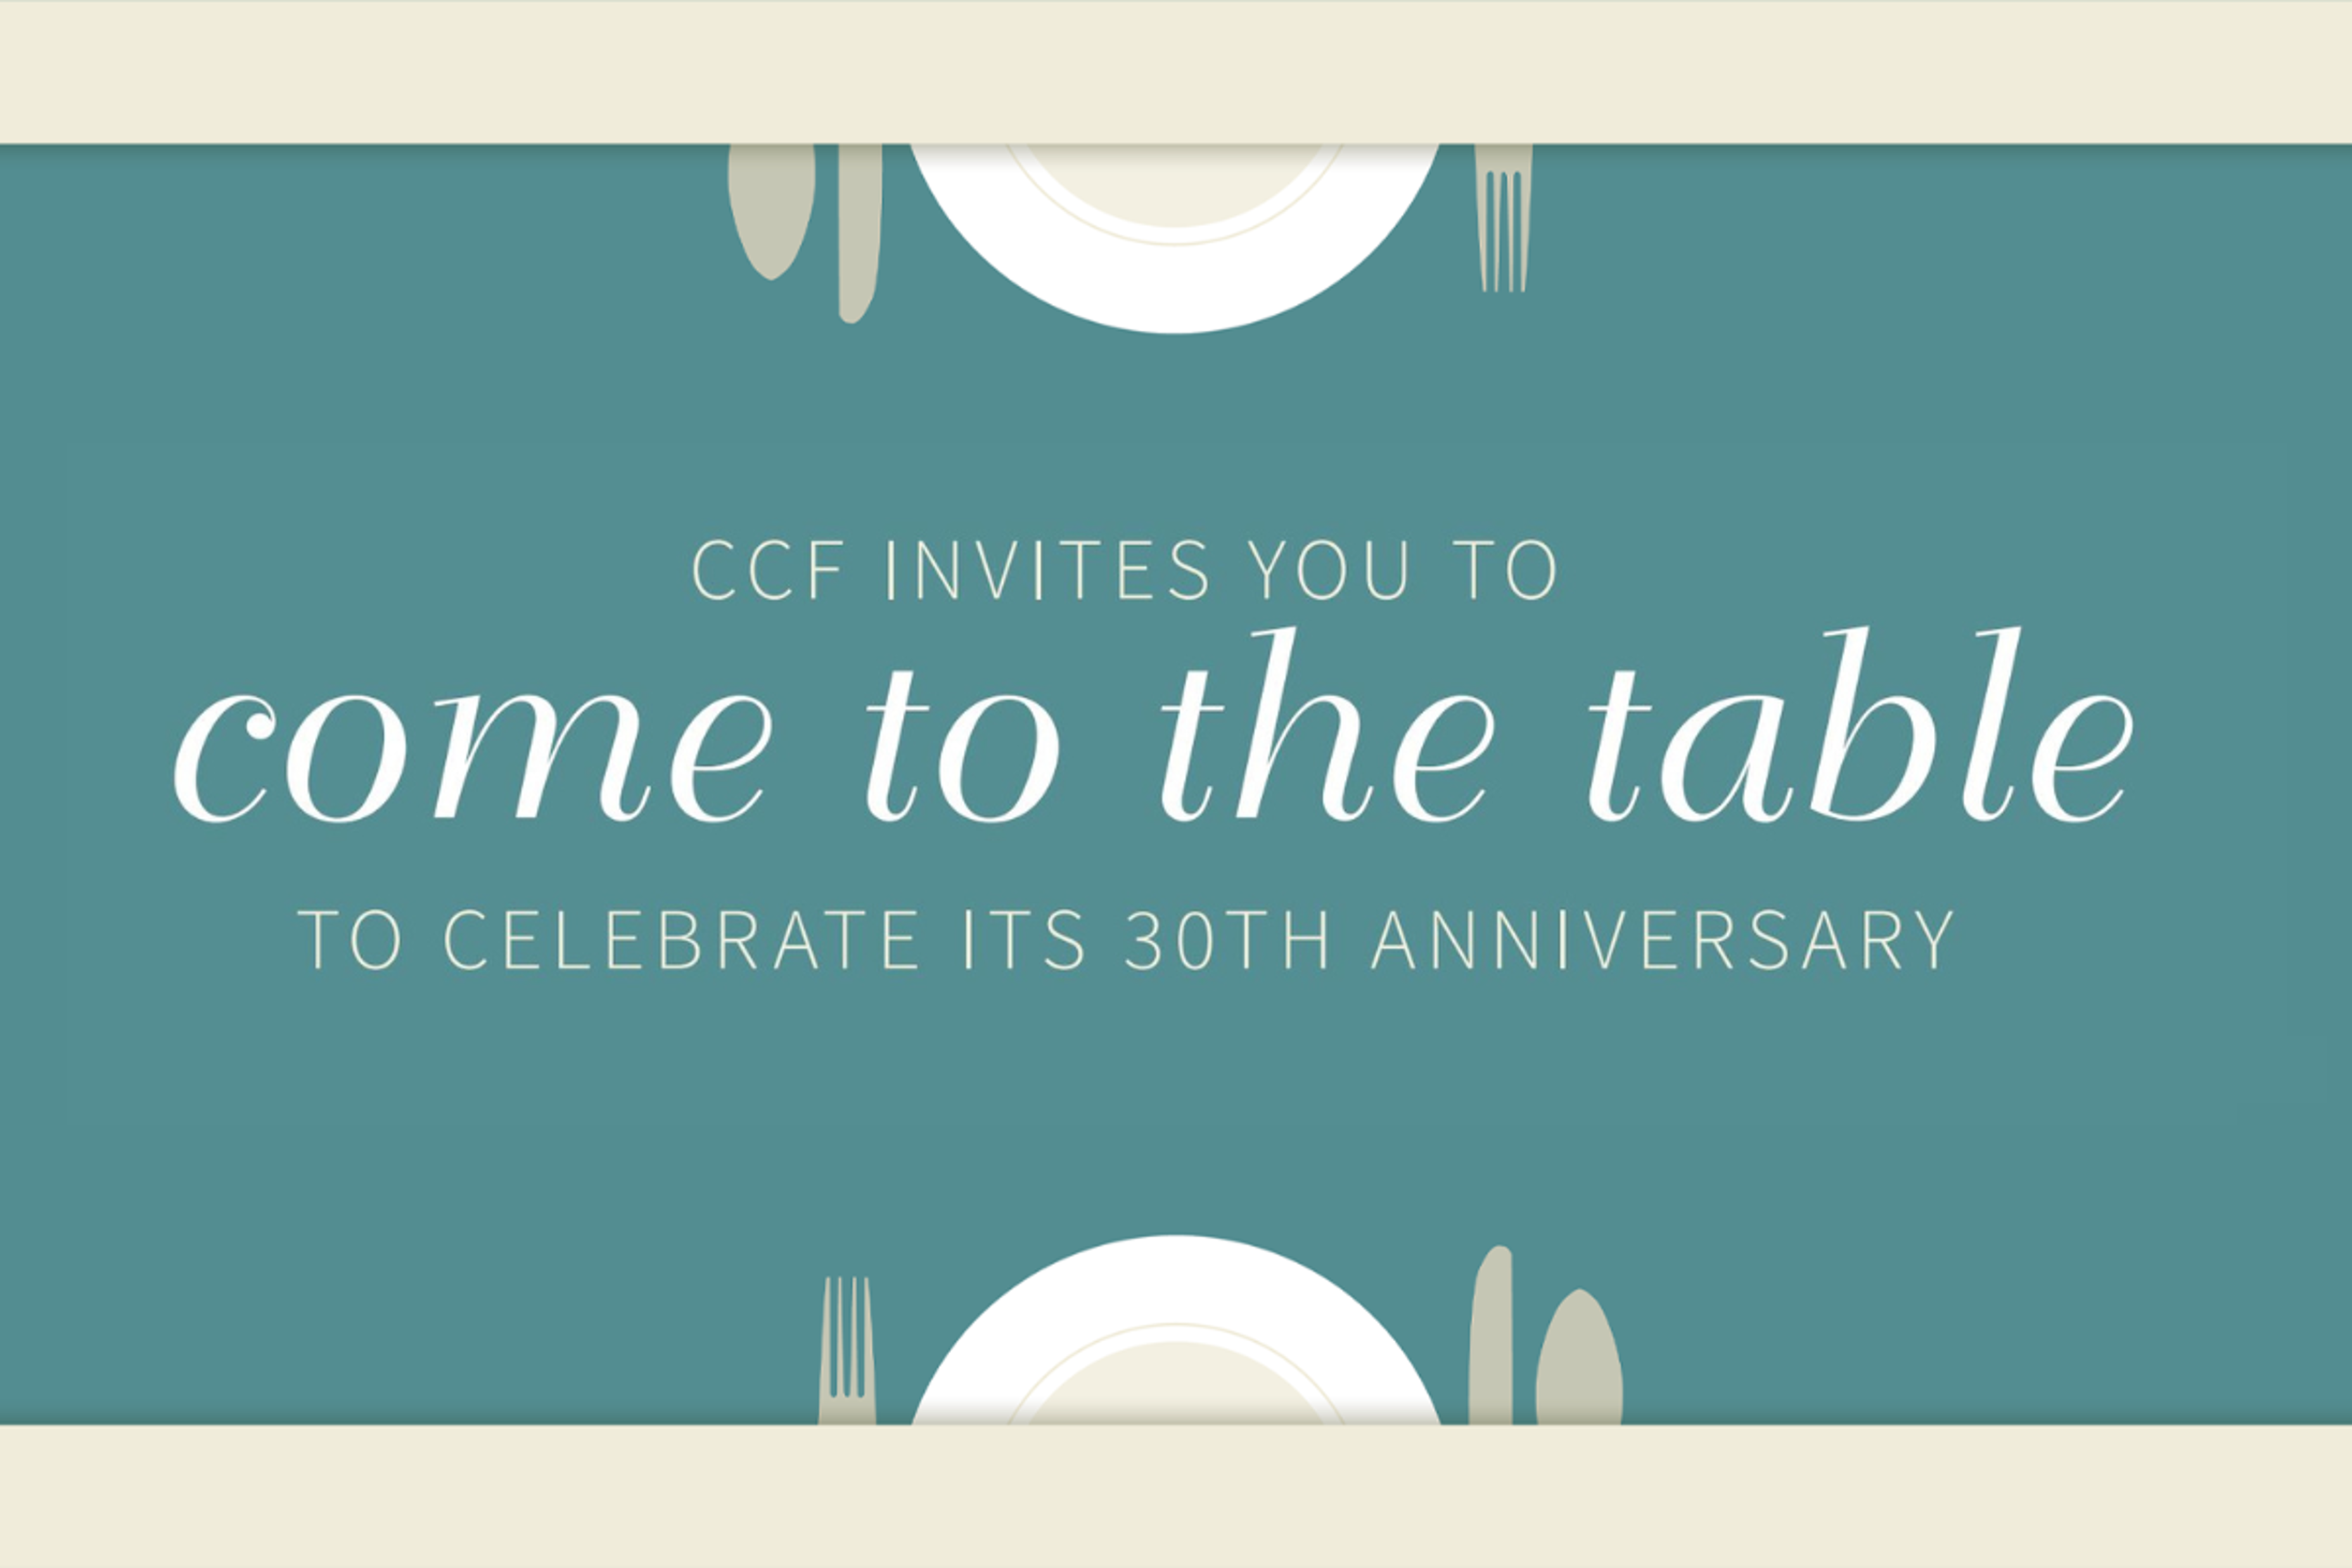 CCF Invites You to Come to the Table to Celebrate its 30th